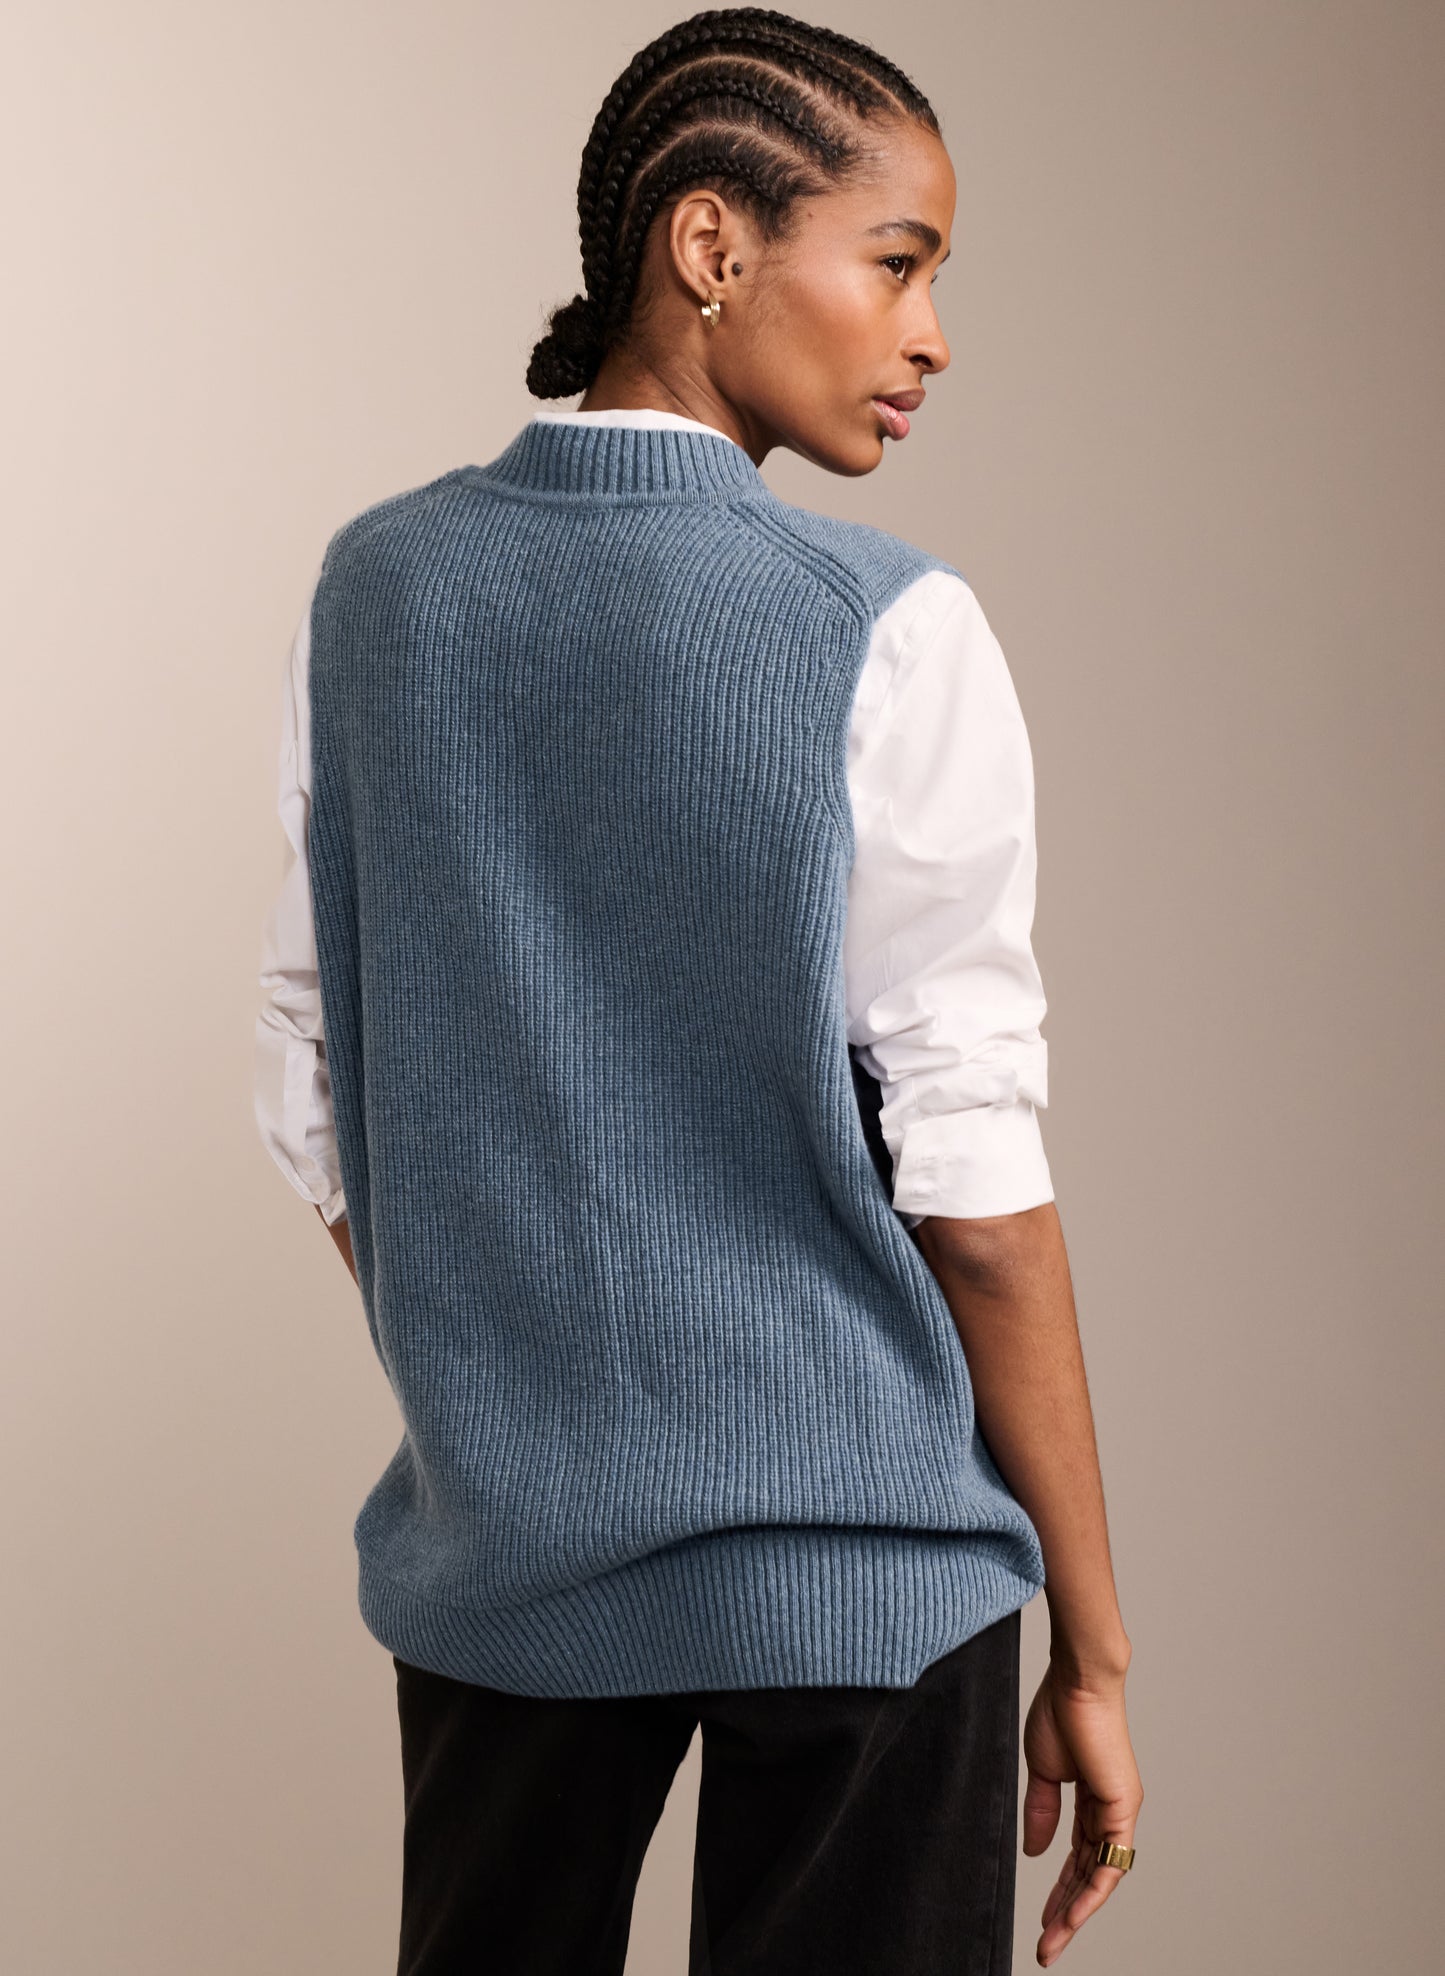 Katalina Recycled Wool Knitted Vest